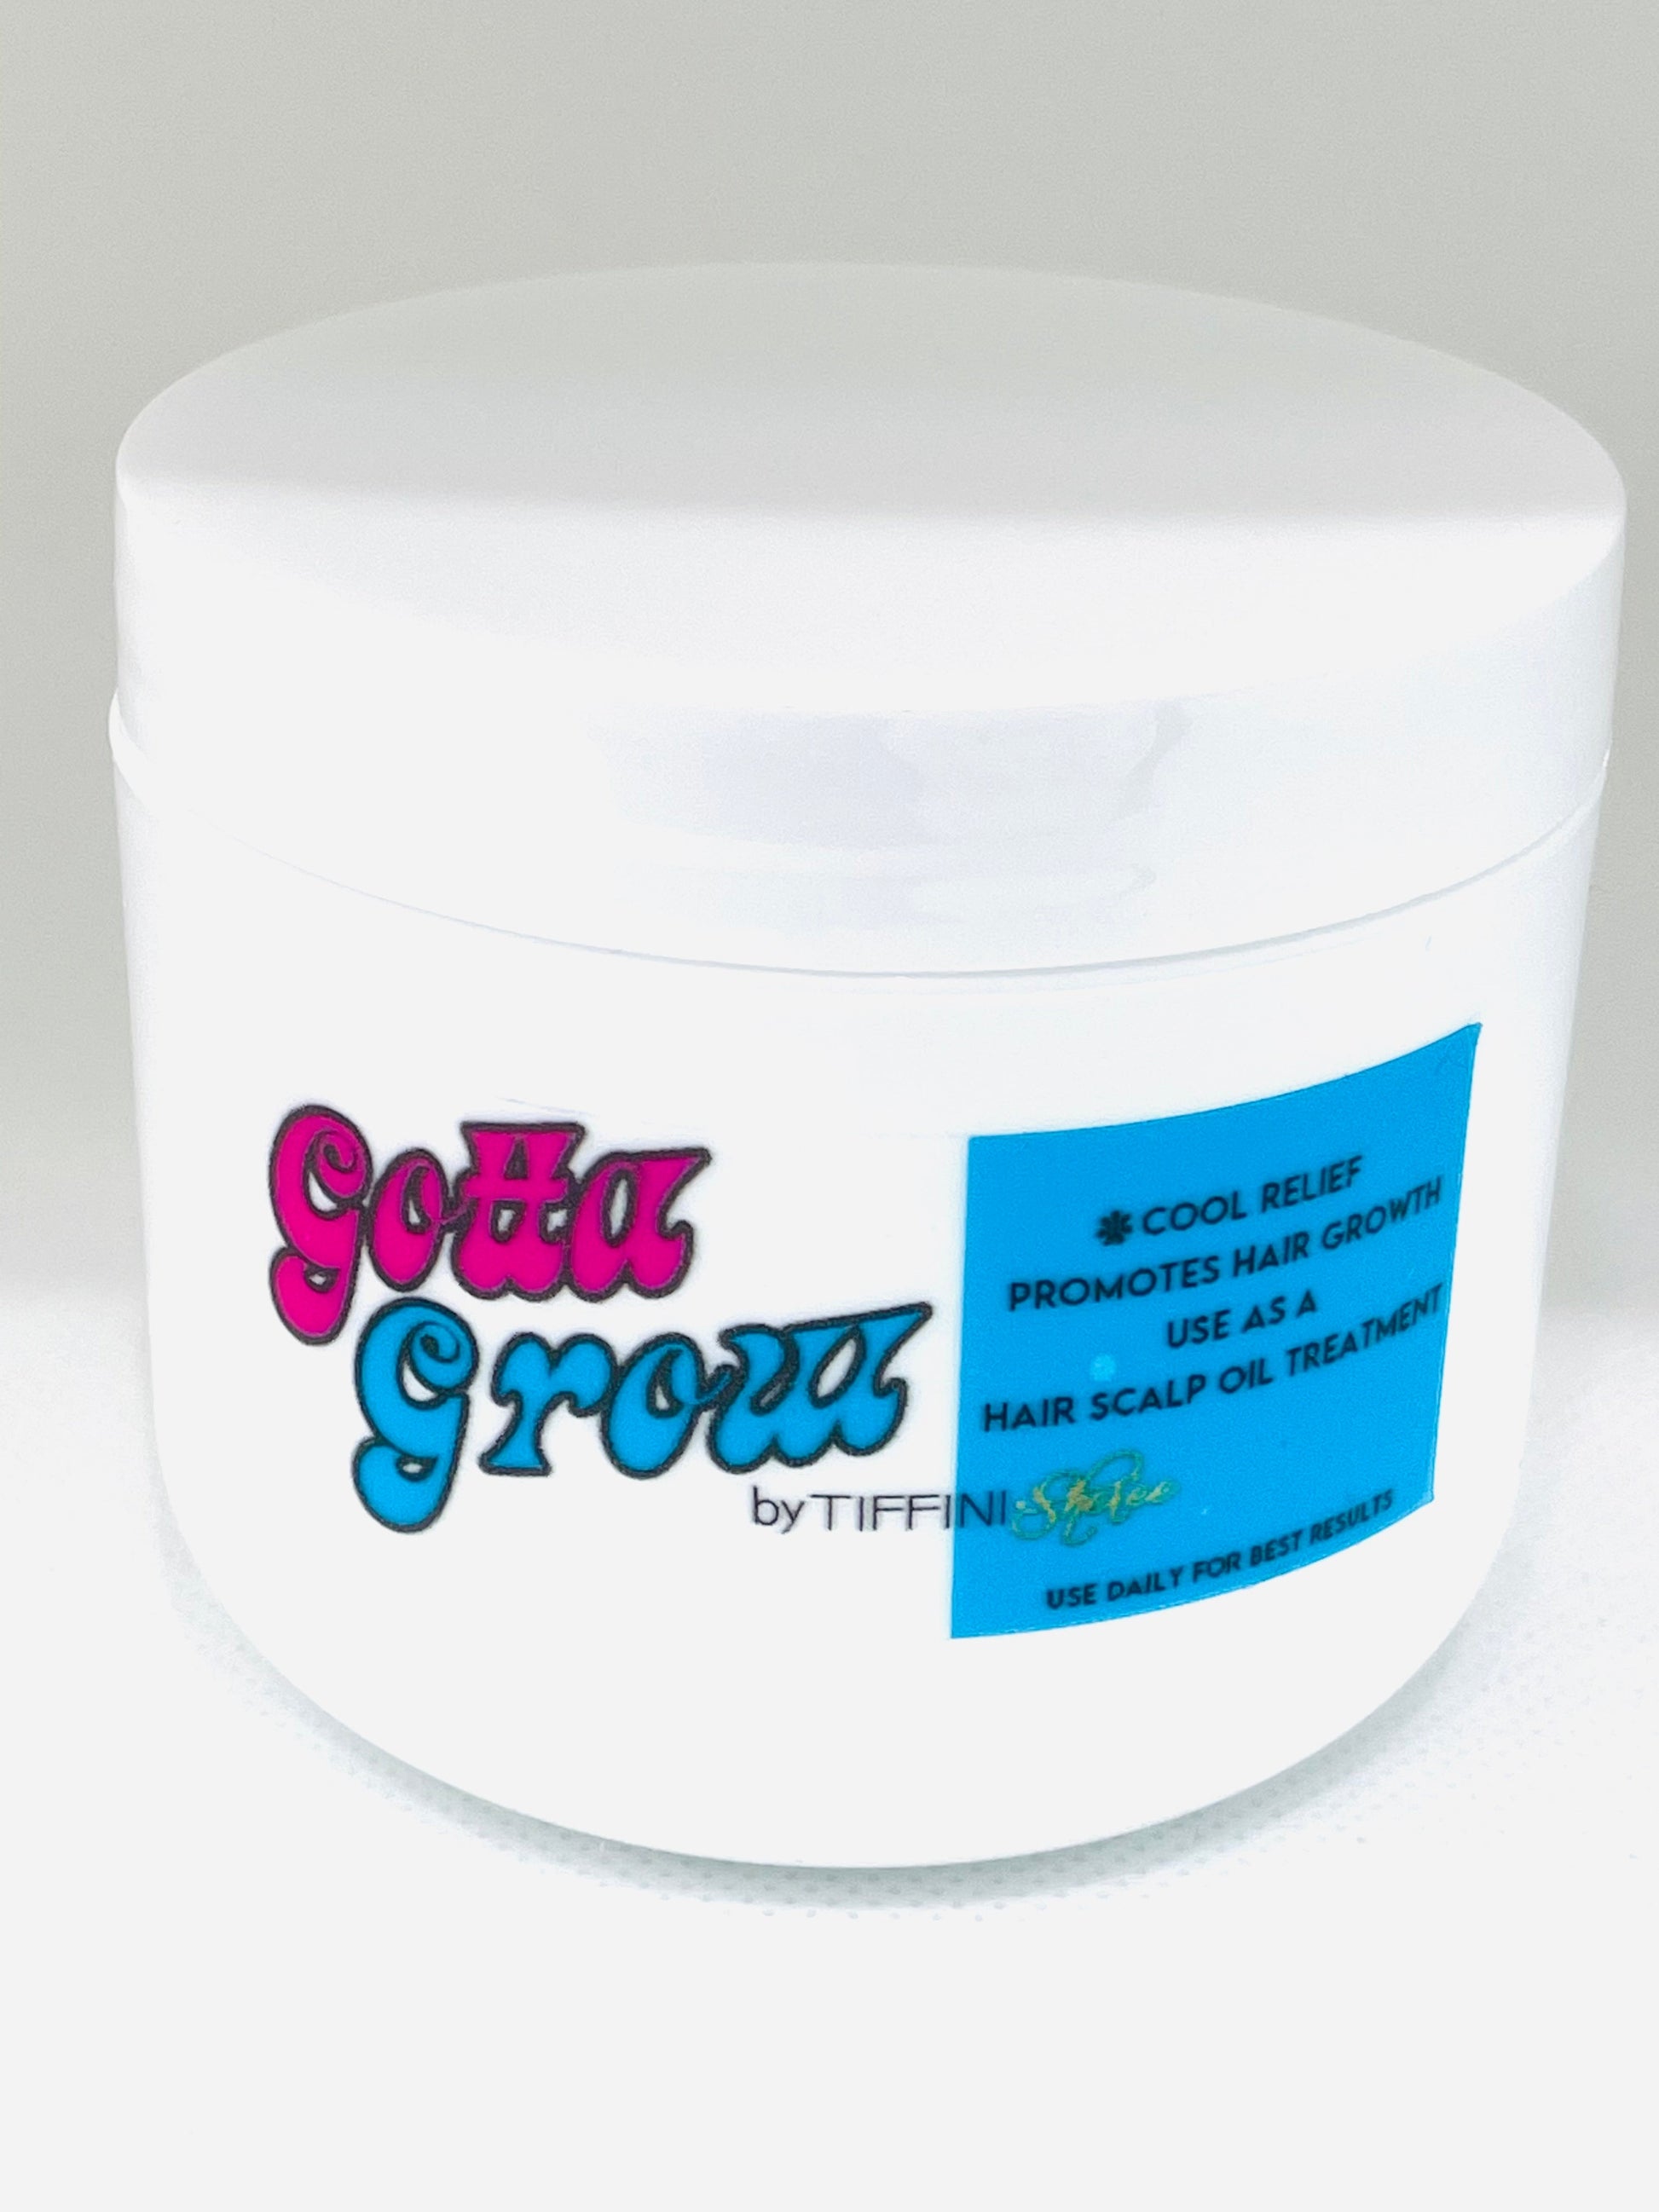 Gotta Grow hair grow grease is formulated with a special blend of natural oils to stimulate healthy hair growth, promoting a fuller and longer look in just weeks. It's a simple and effective solution for hair growth and maintenance.